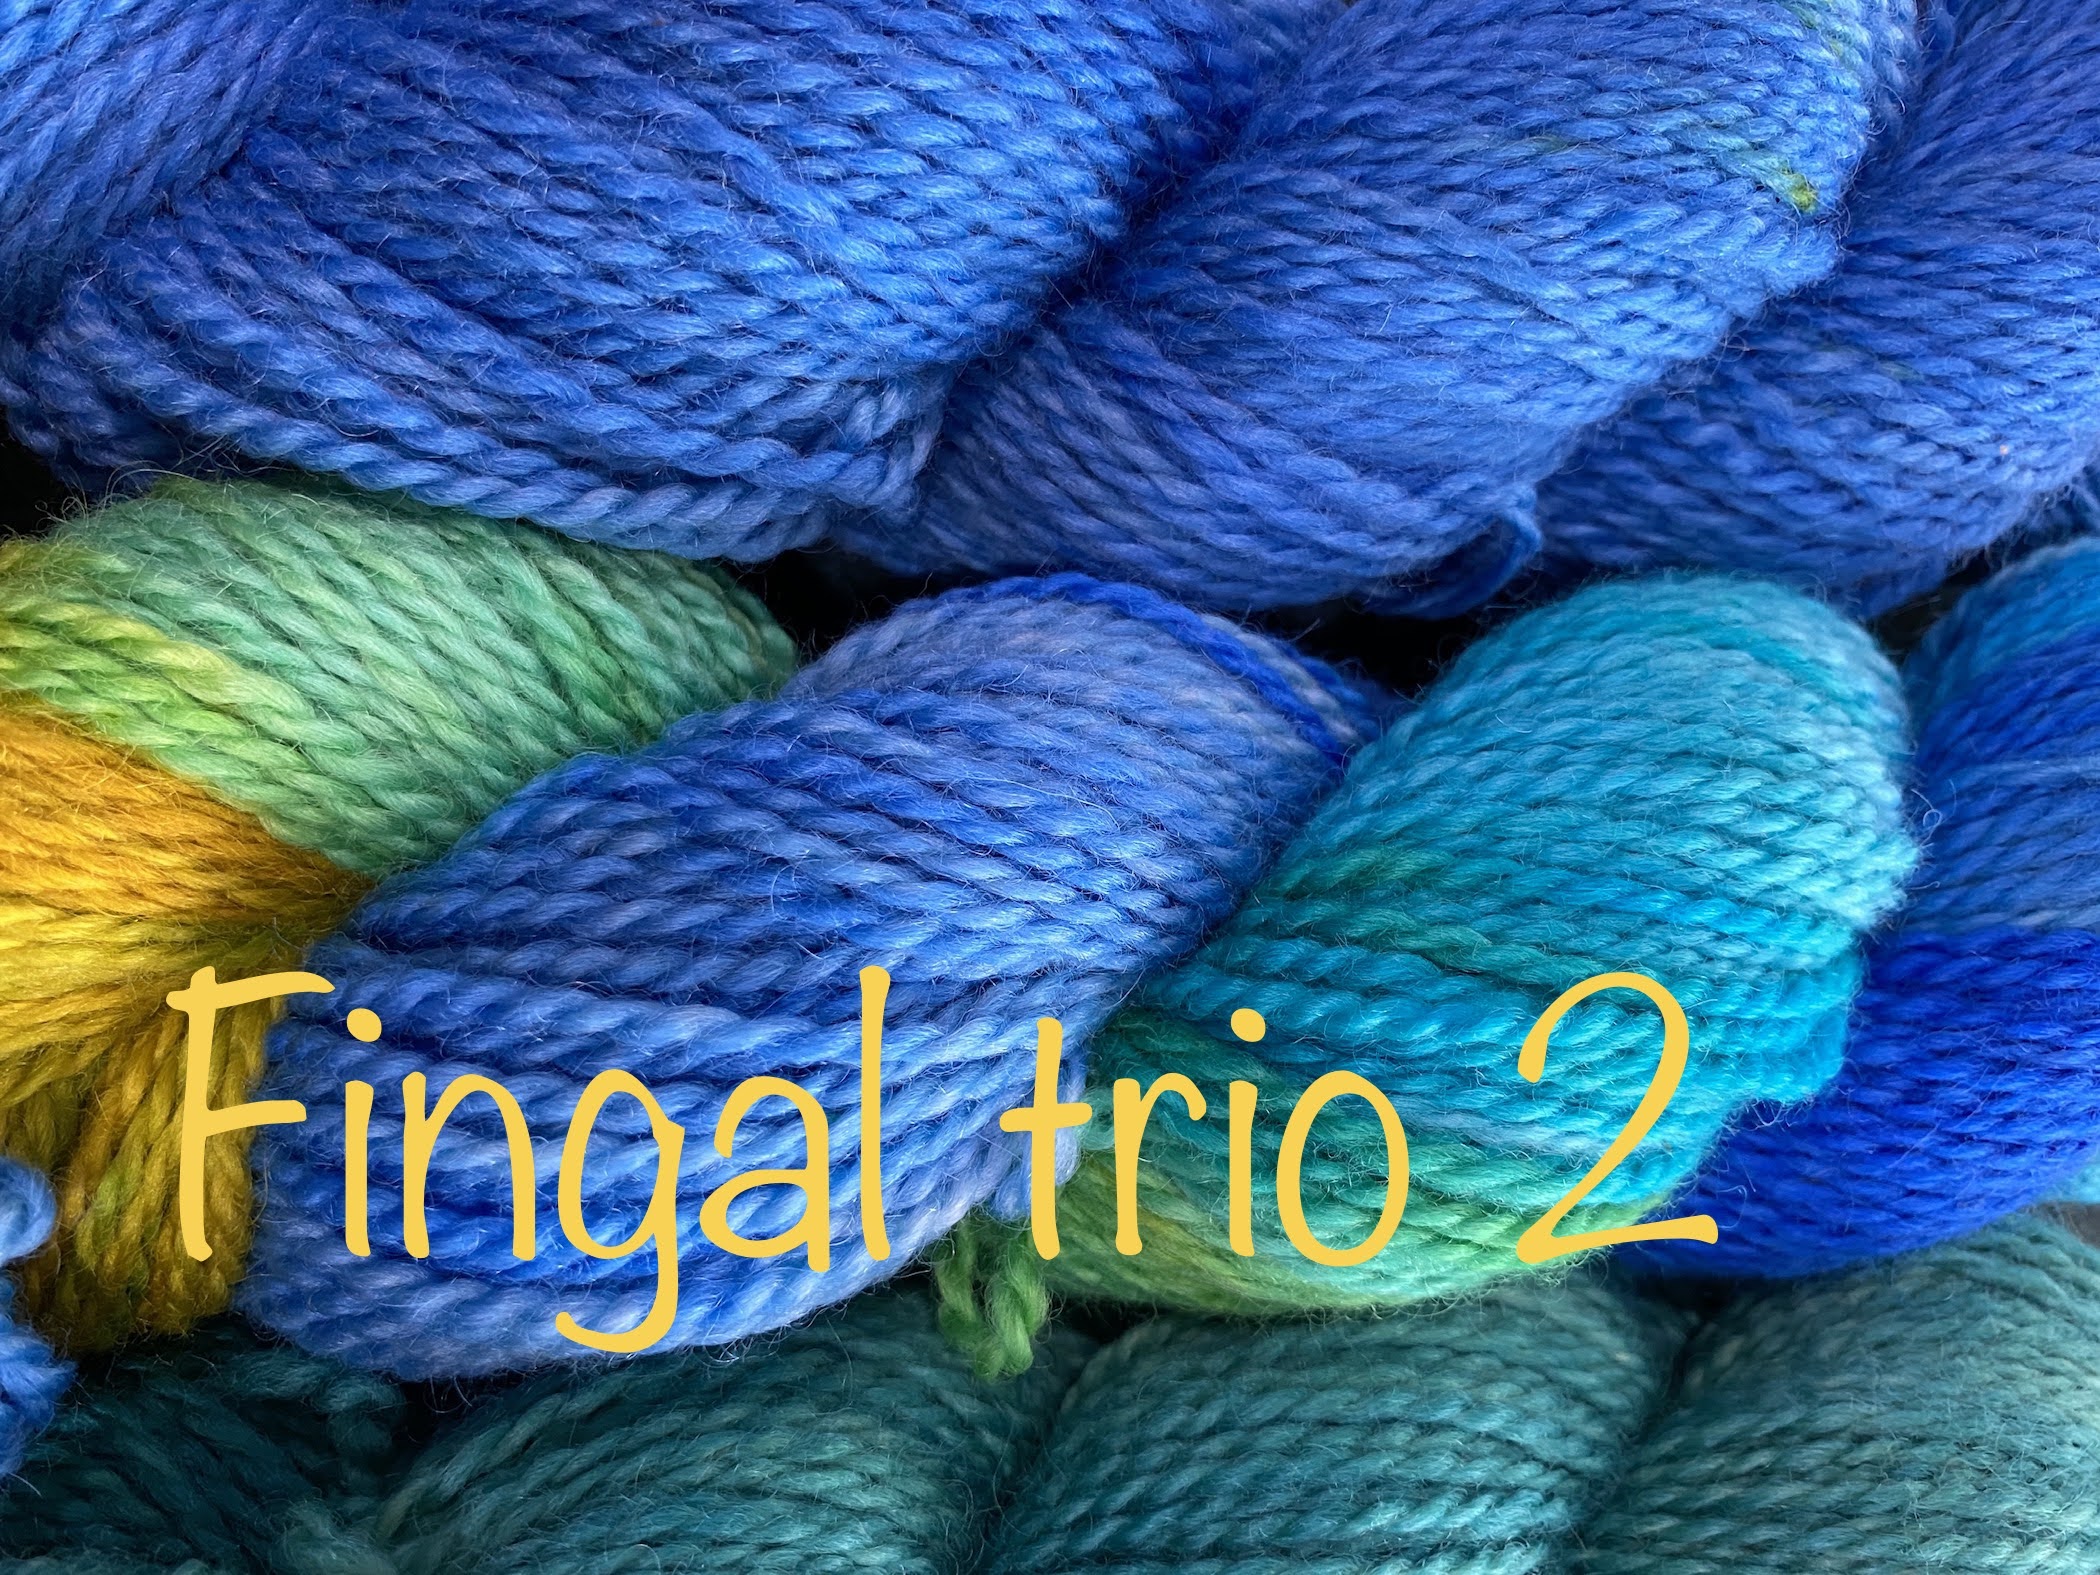 3 skeins in blues and greens